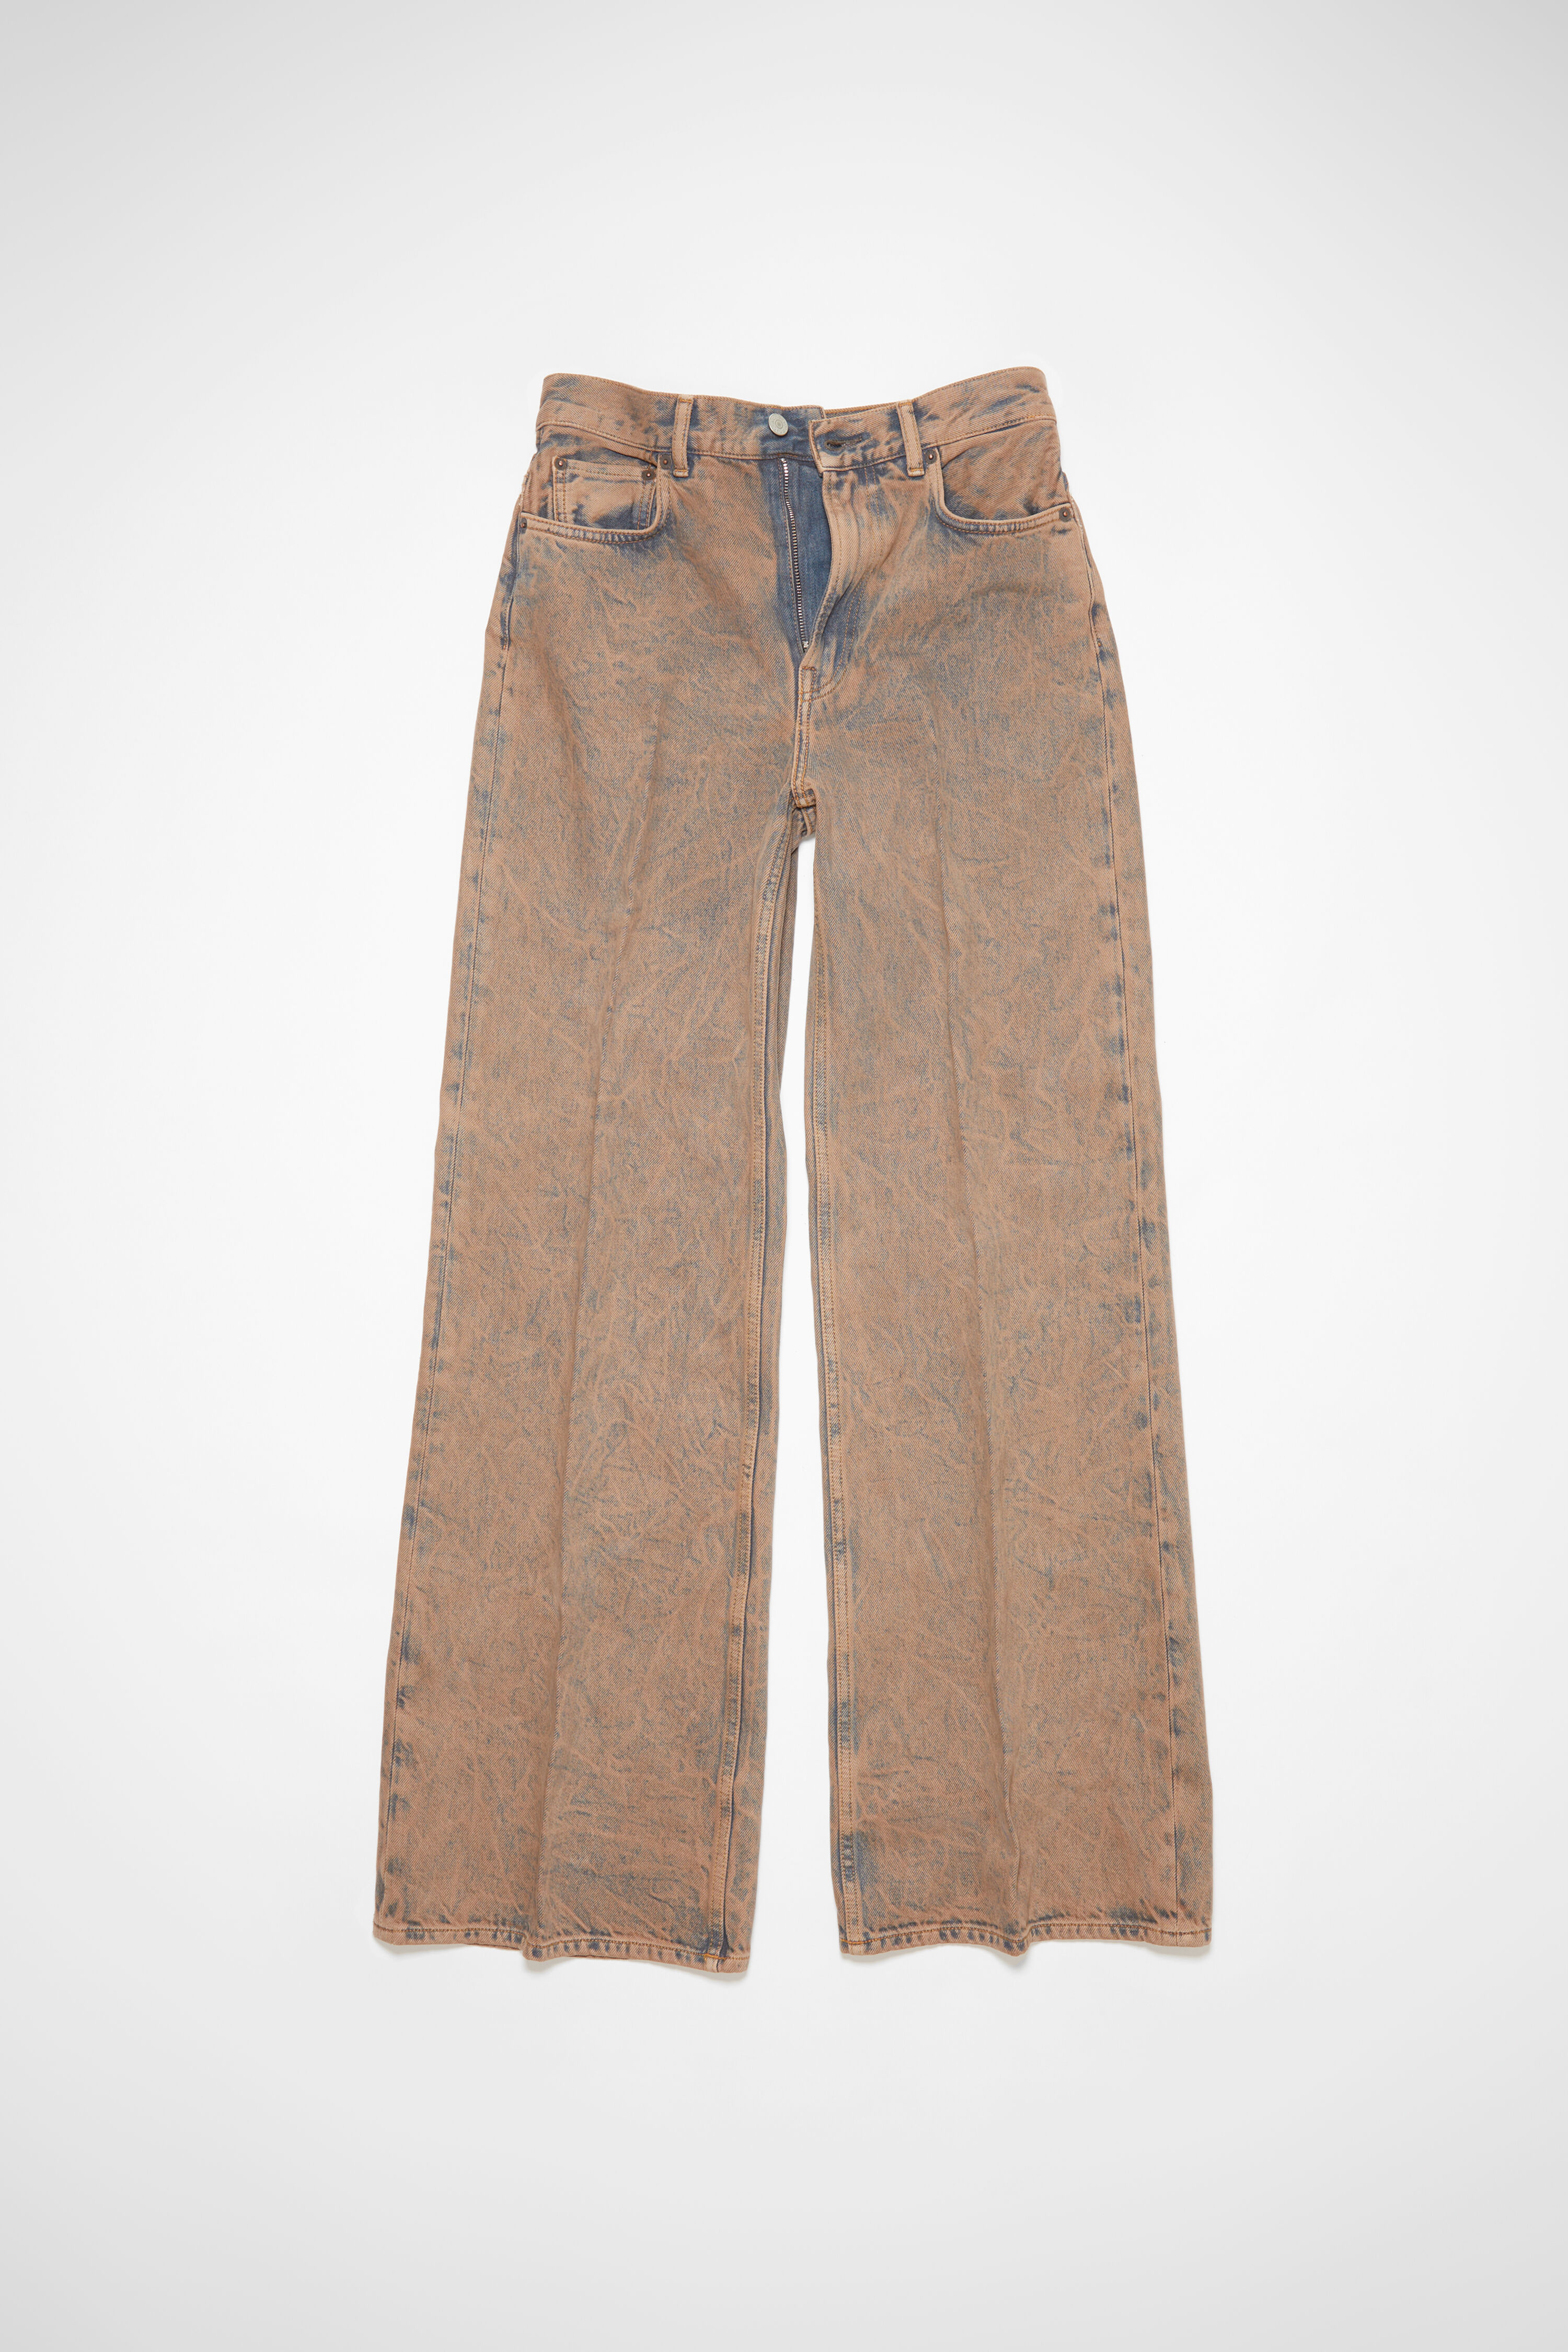 Acne Studios - Relaxed fit jeans - 2022 - Mid blue